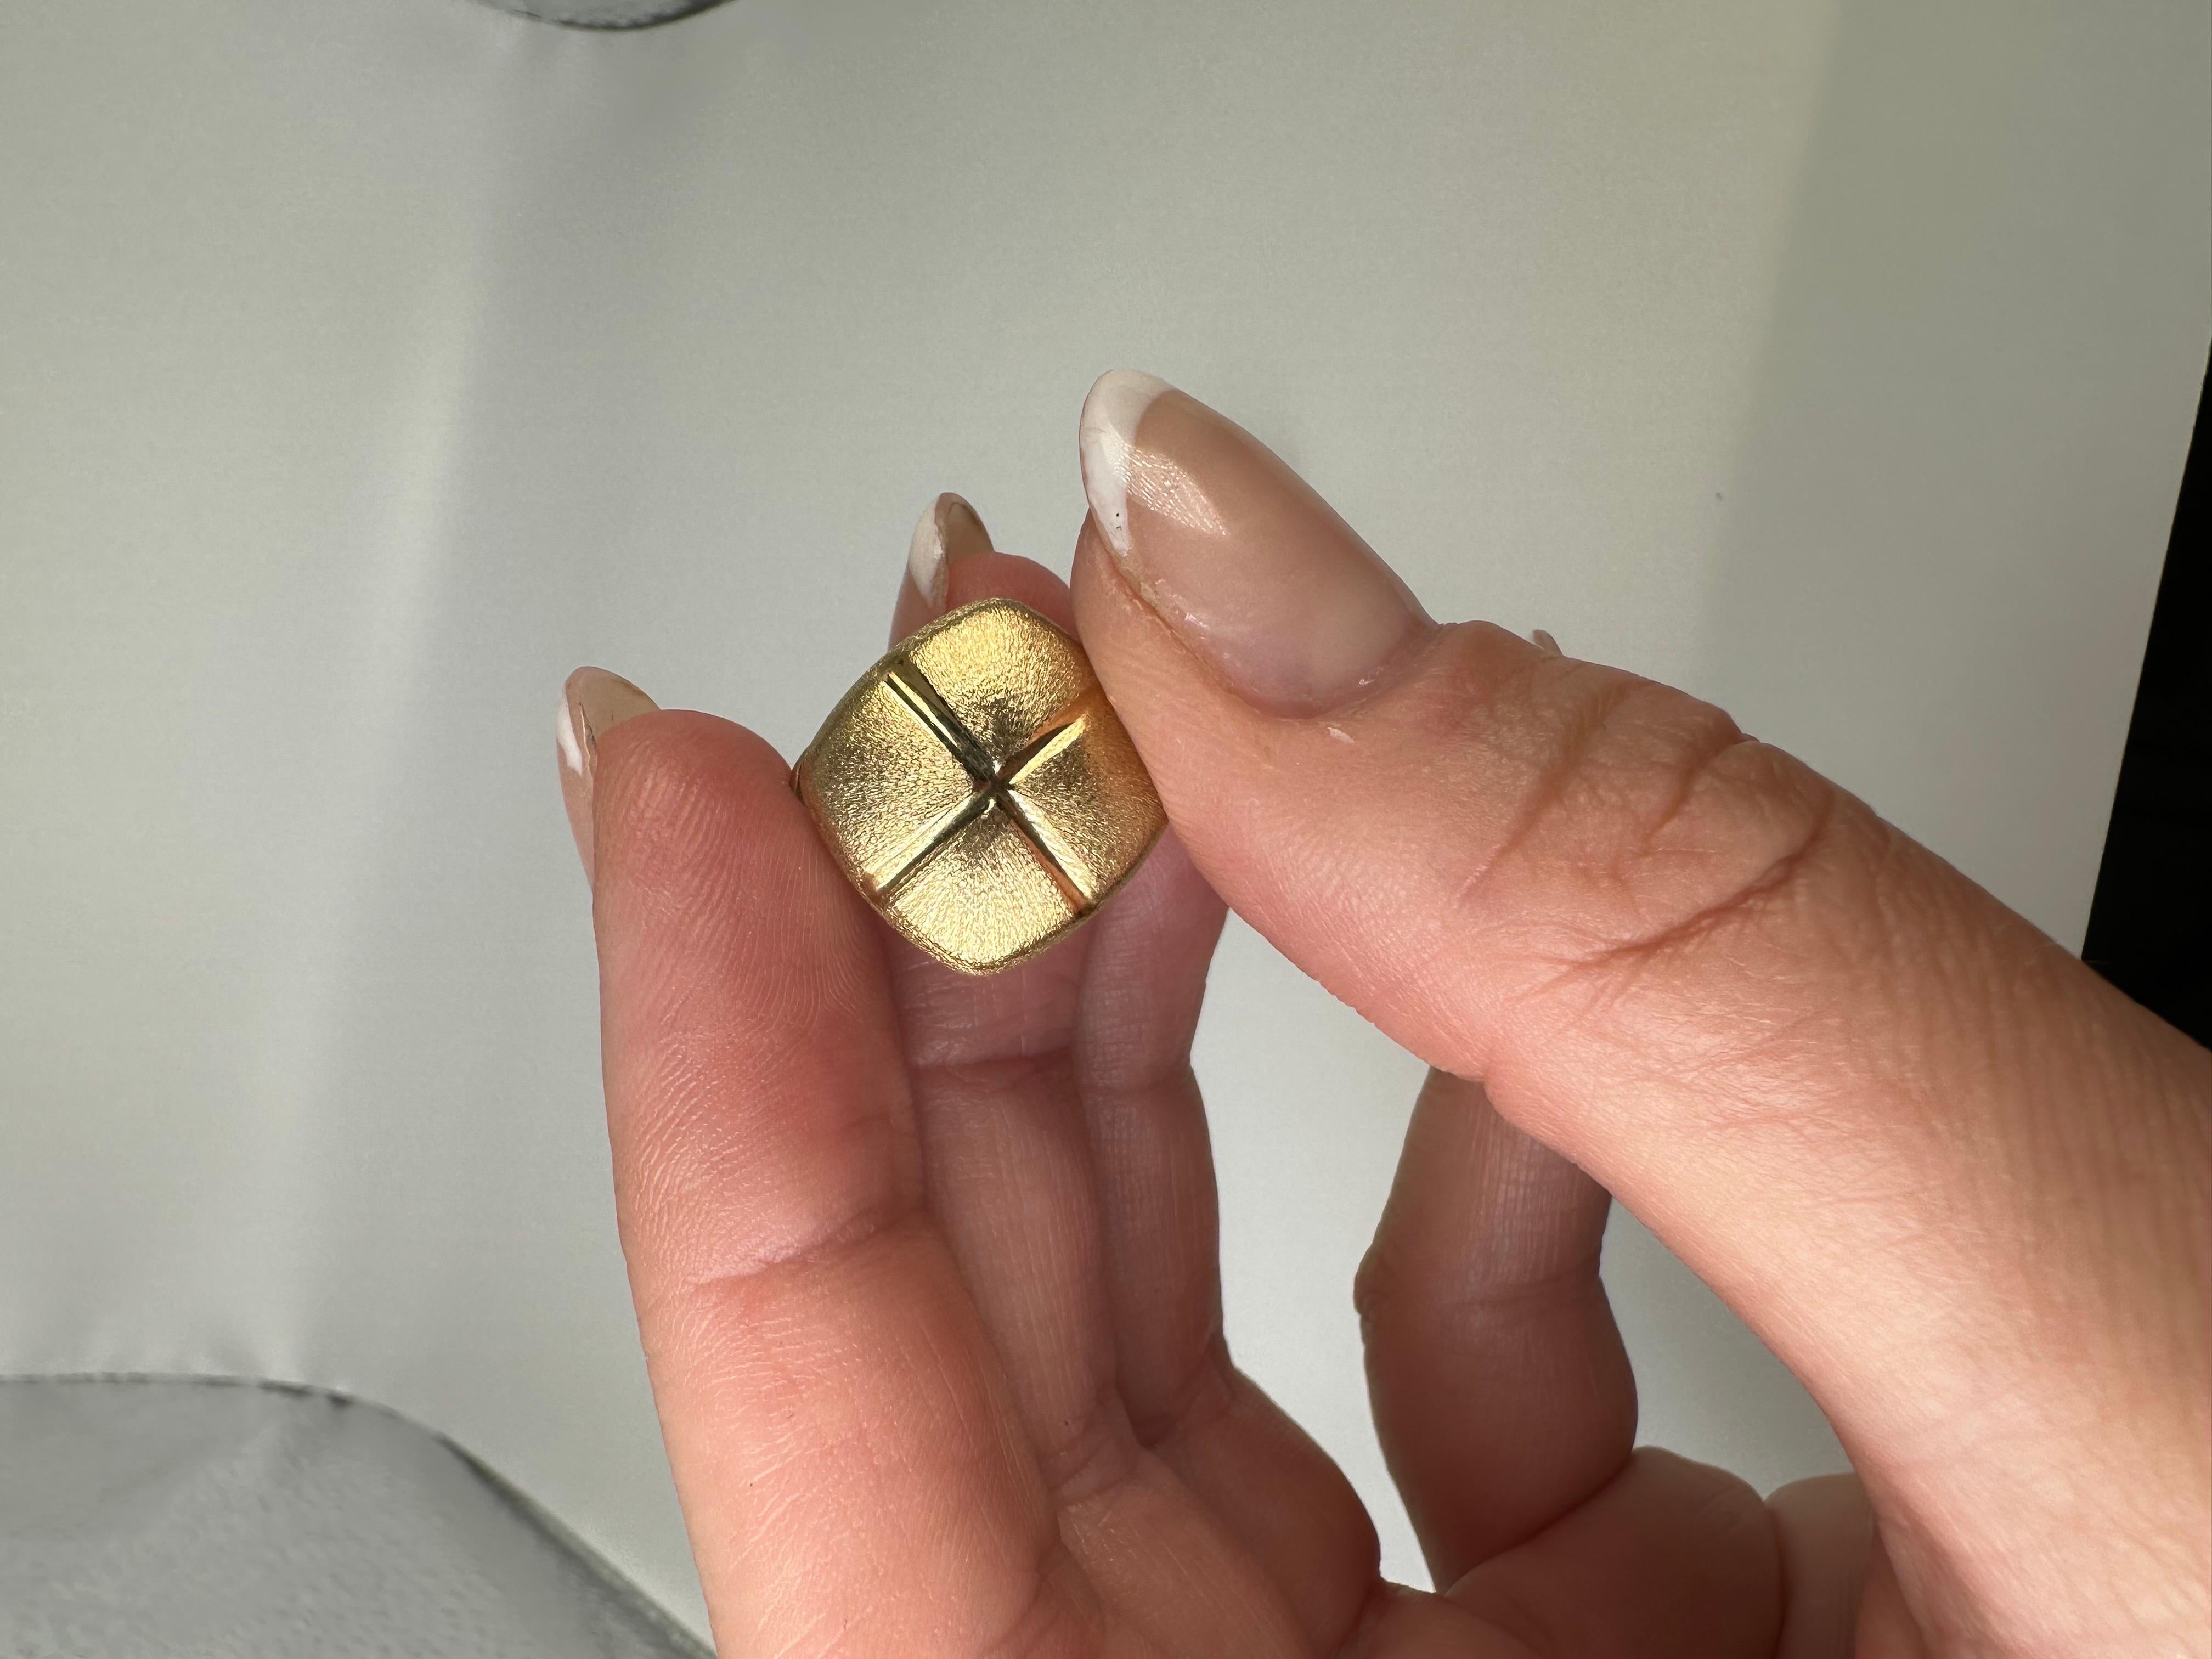 Button square gold earrings 18KT omega closure abrasive polish design In Excellent Condition For Sale In Jupiter, FL